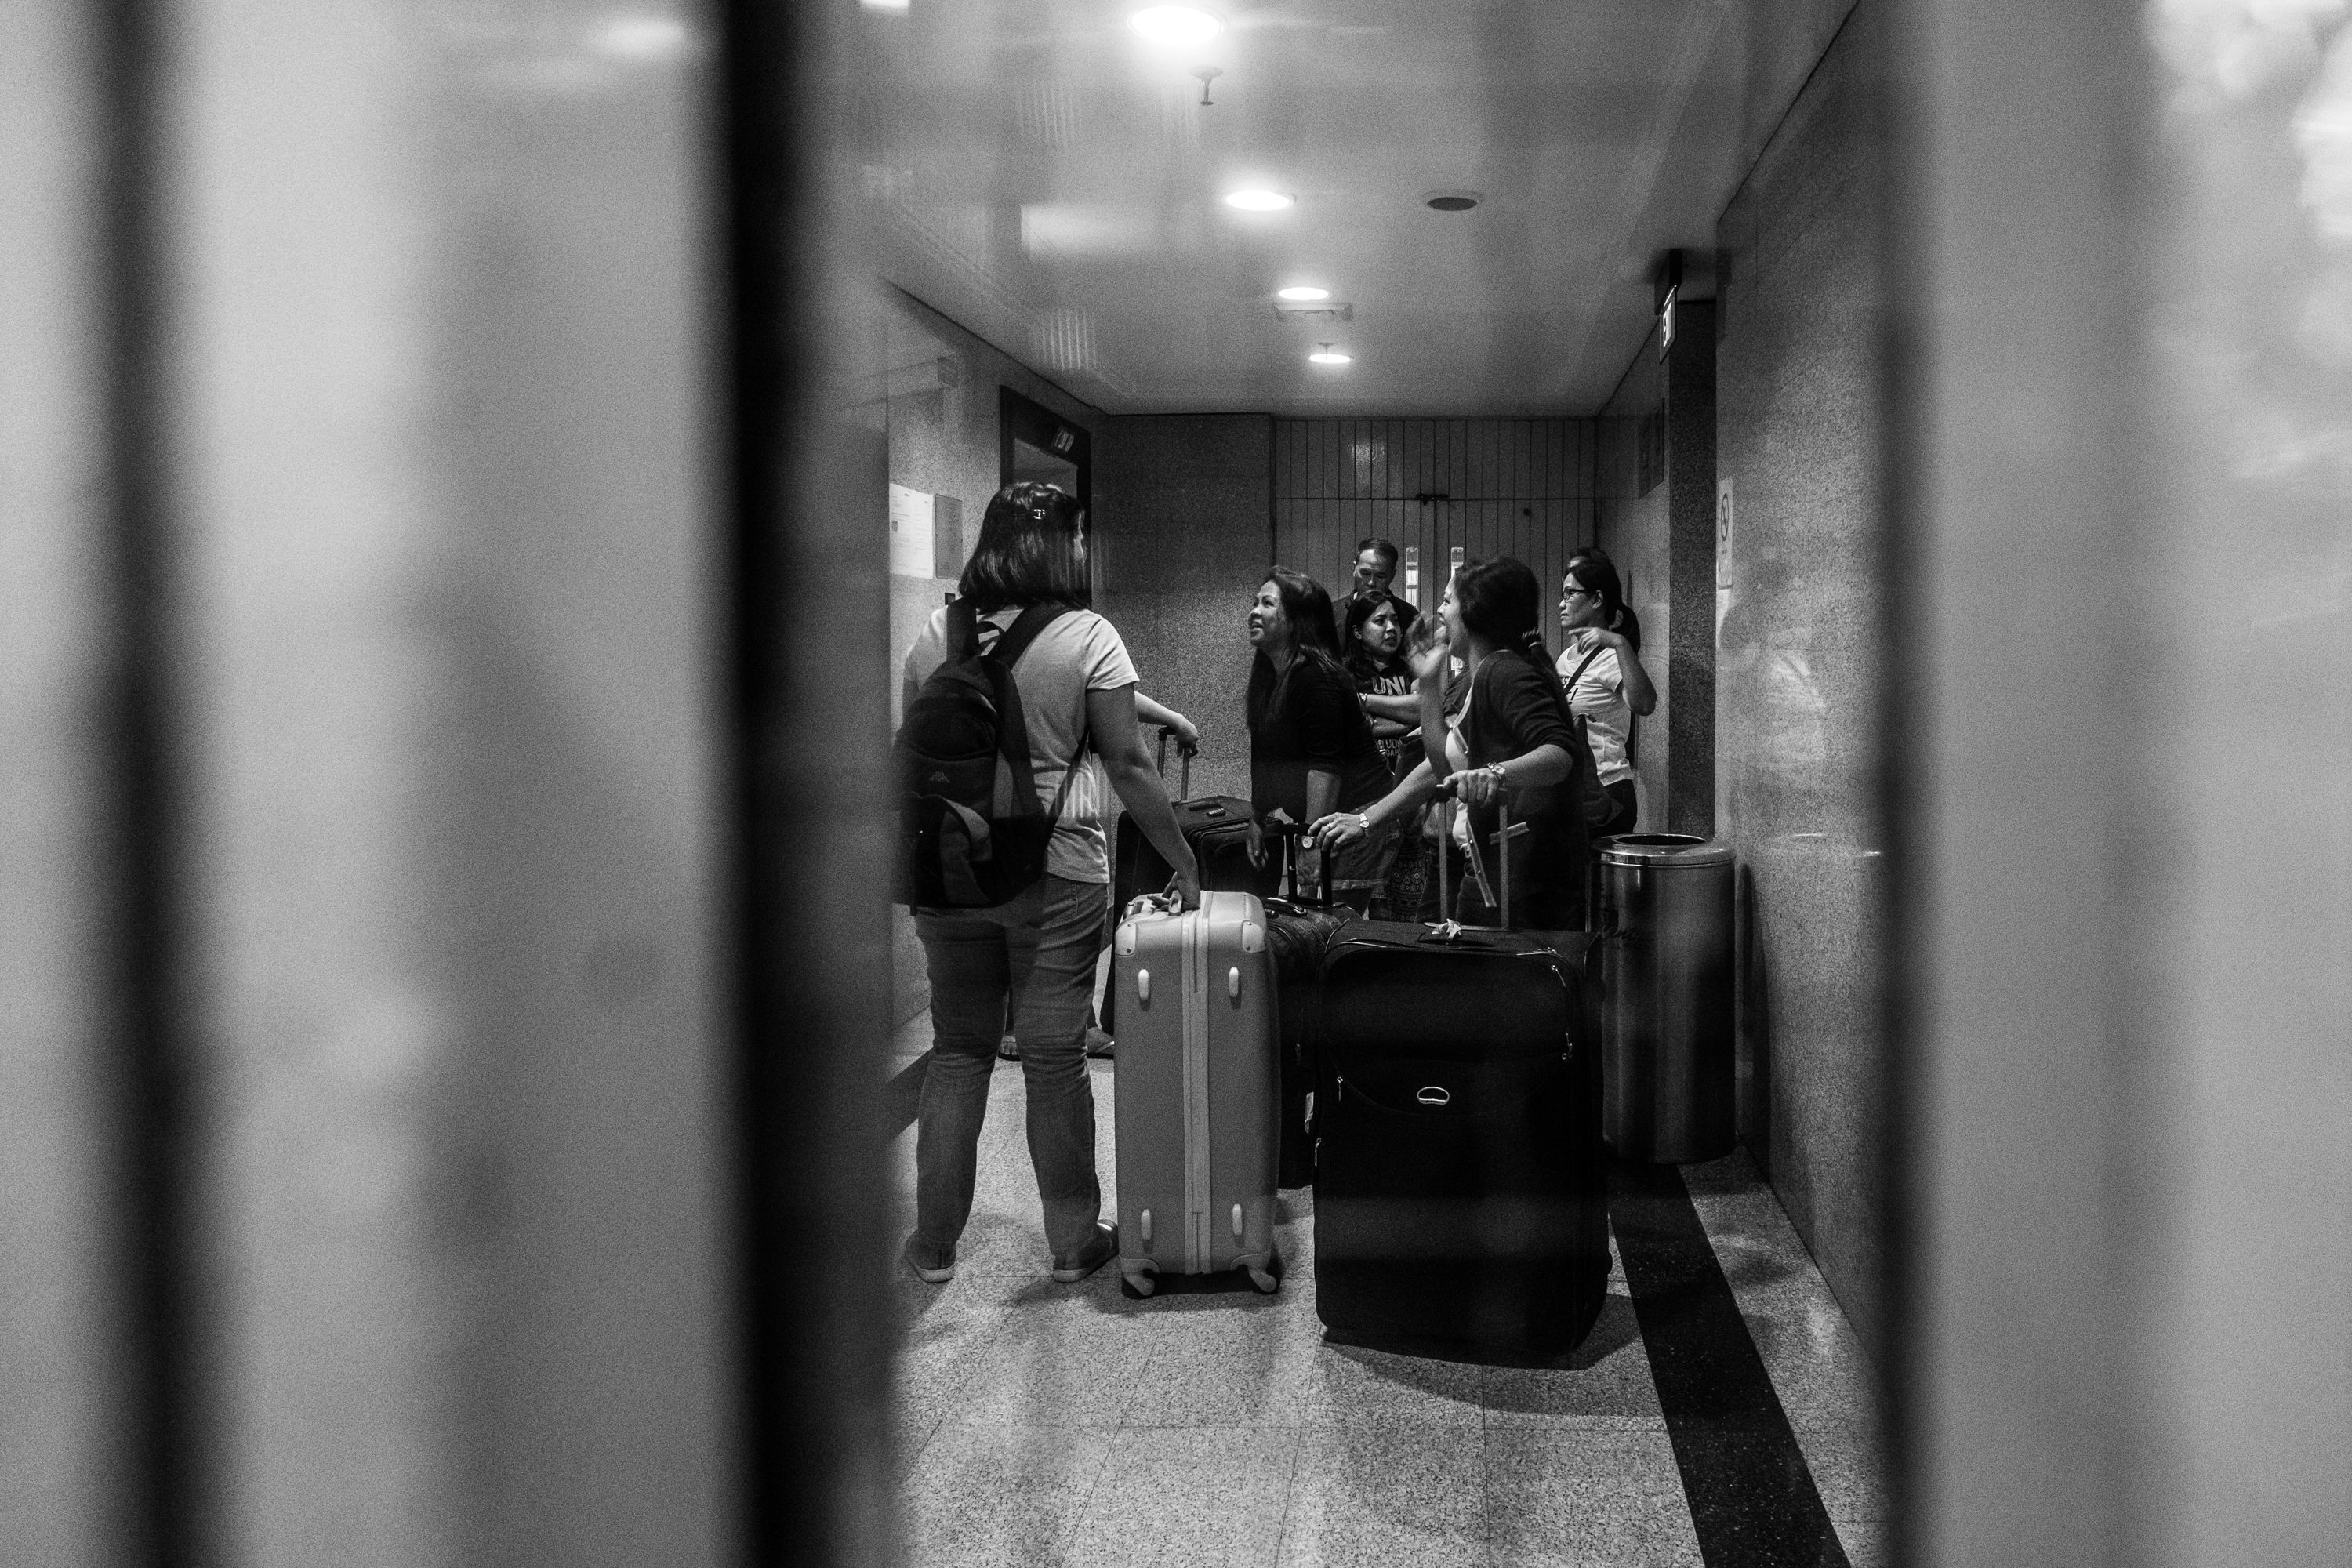 Runaway migrants helped Judy with her luggage inside Far East Shopping Center, where her agency is located. The center is filled with employment agencies. Image by Xyza Bacani. Singapore, 2016.